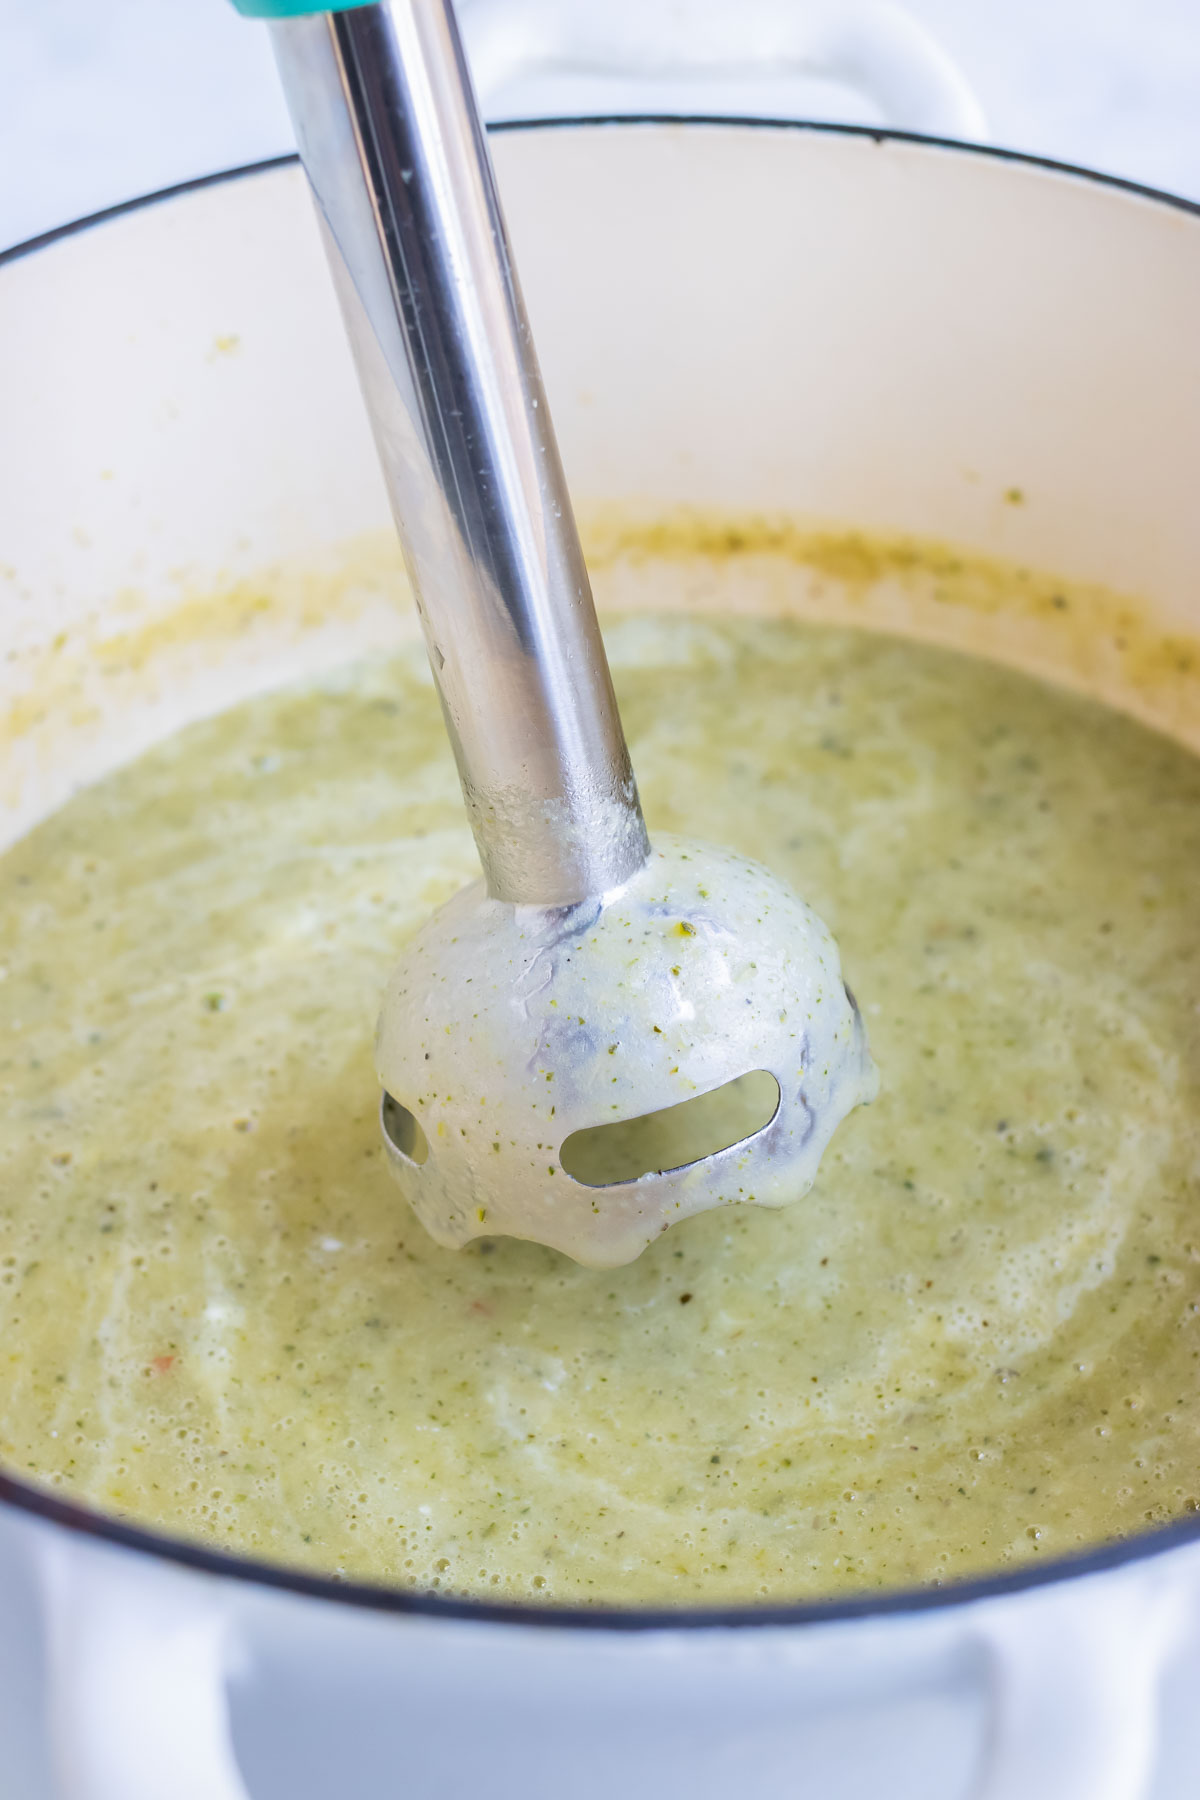 An immersion blender is used to create a smooth soup.